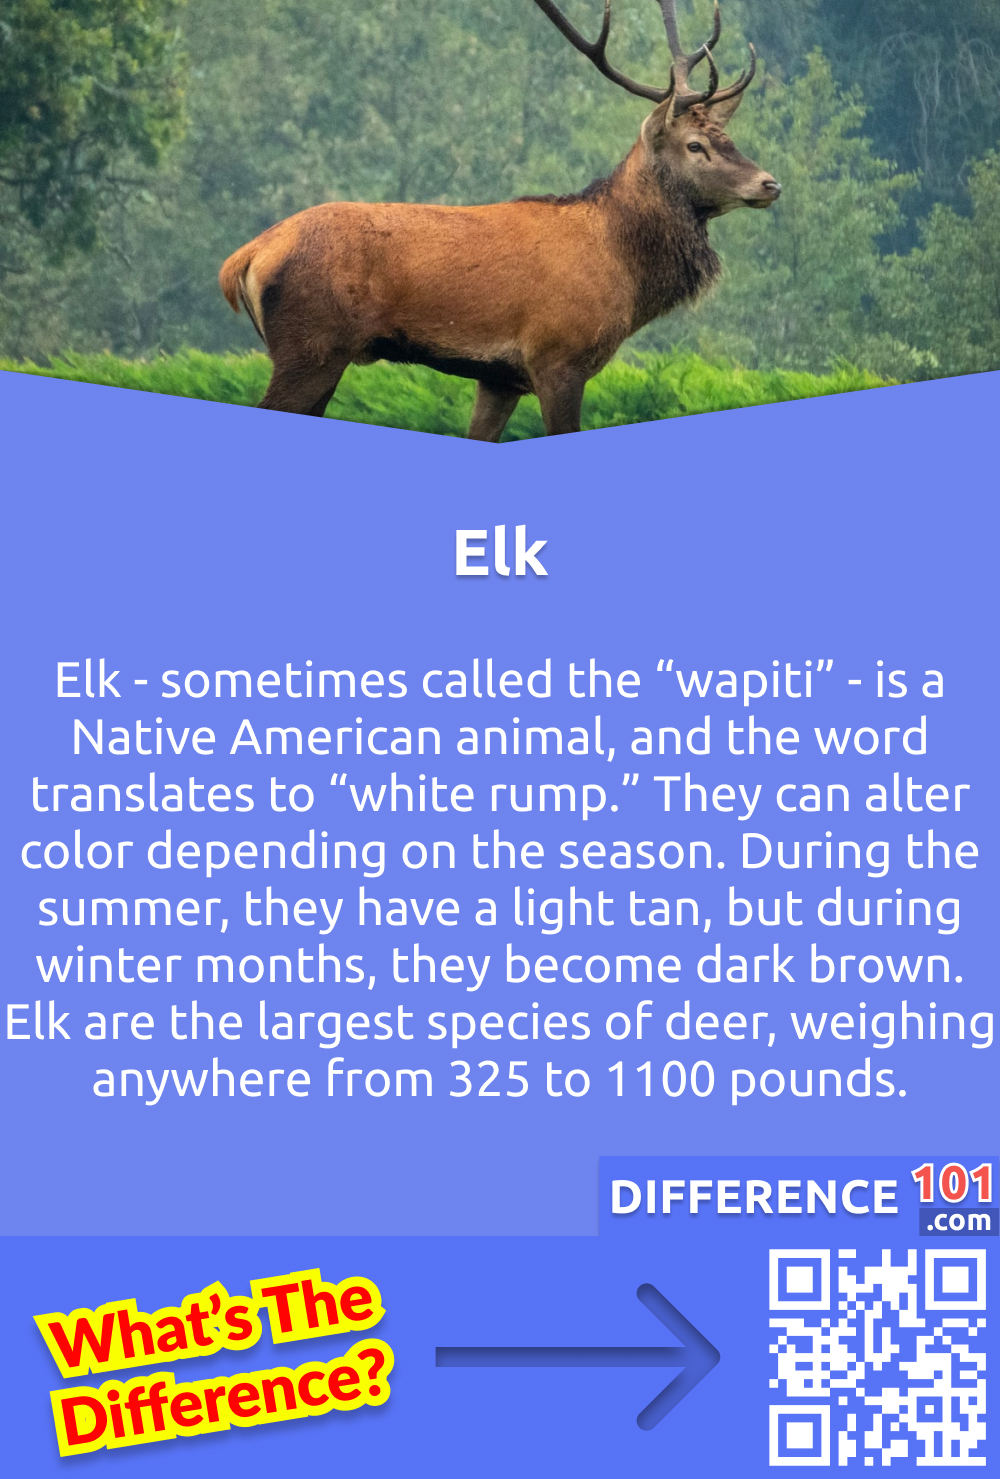 What is an Elk? Elk - sometimes called the “wapiti” - is a Native American animal, and the word translates to “white rump.” They can alter color depending on the season. During the summer, they have a light tan, but during winter months, they become dark brown. Elk are the largest species of deer, weighing anywhere from 325 to 1100 pounds.